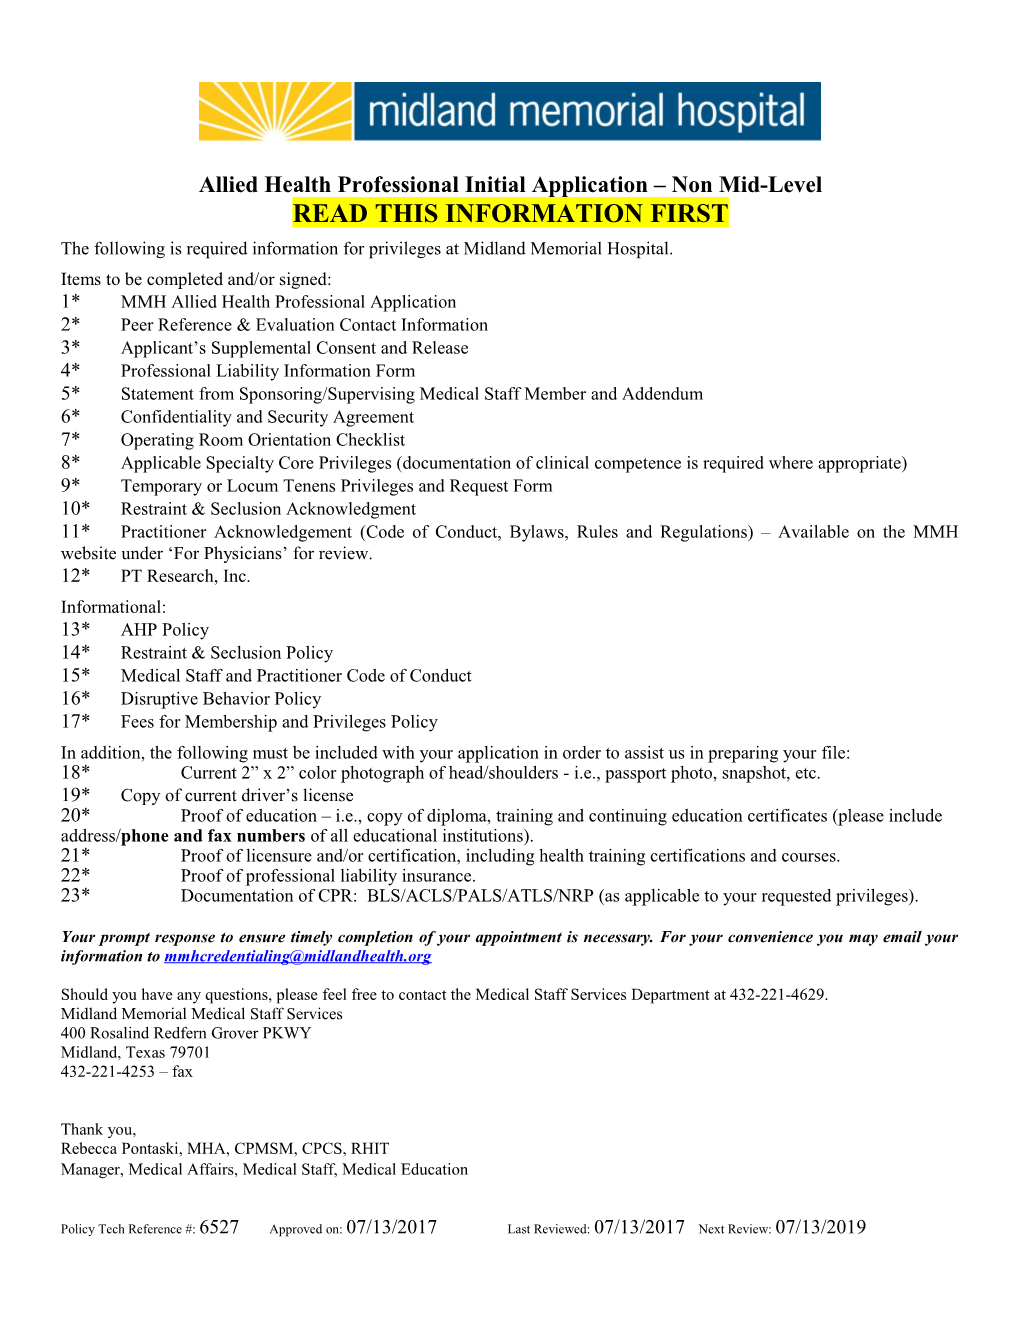 Allied Health Professional Initial Application Non Mid-Level